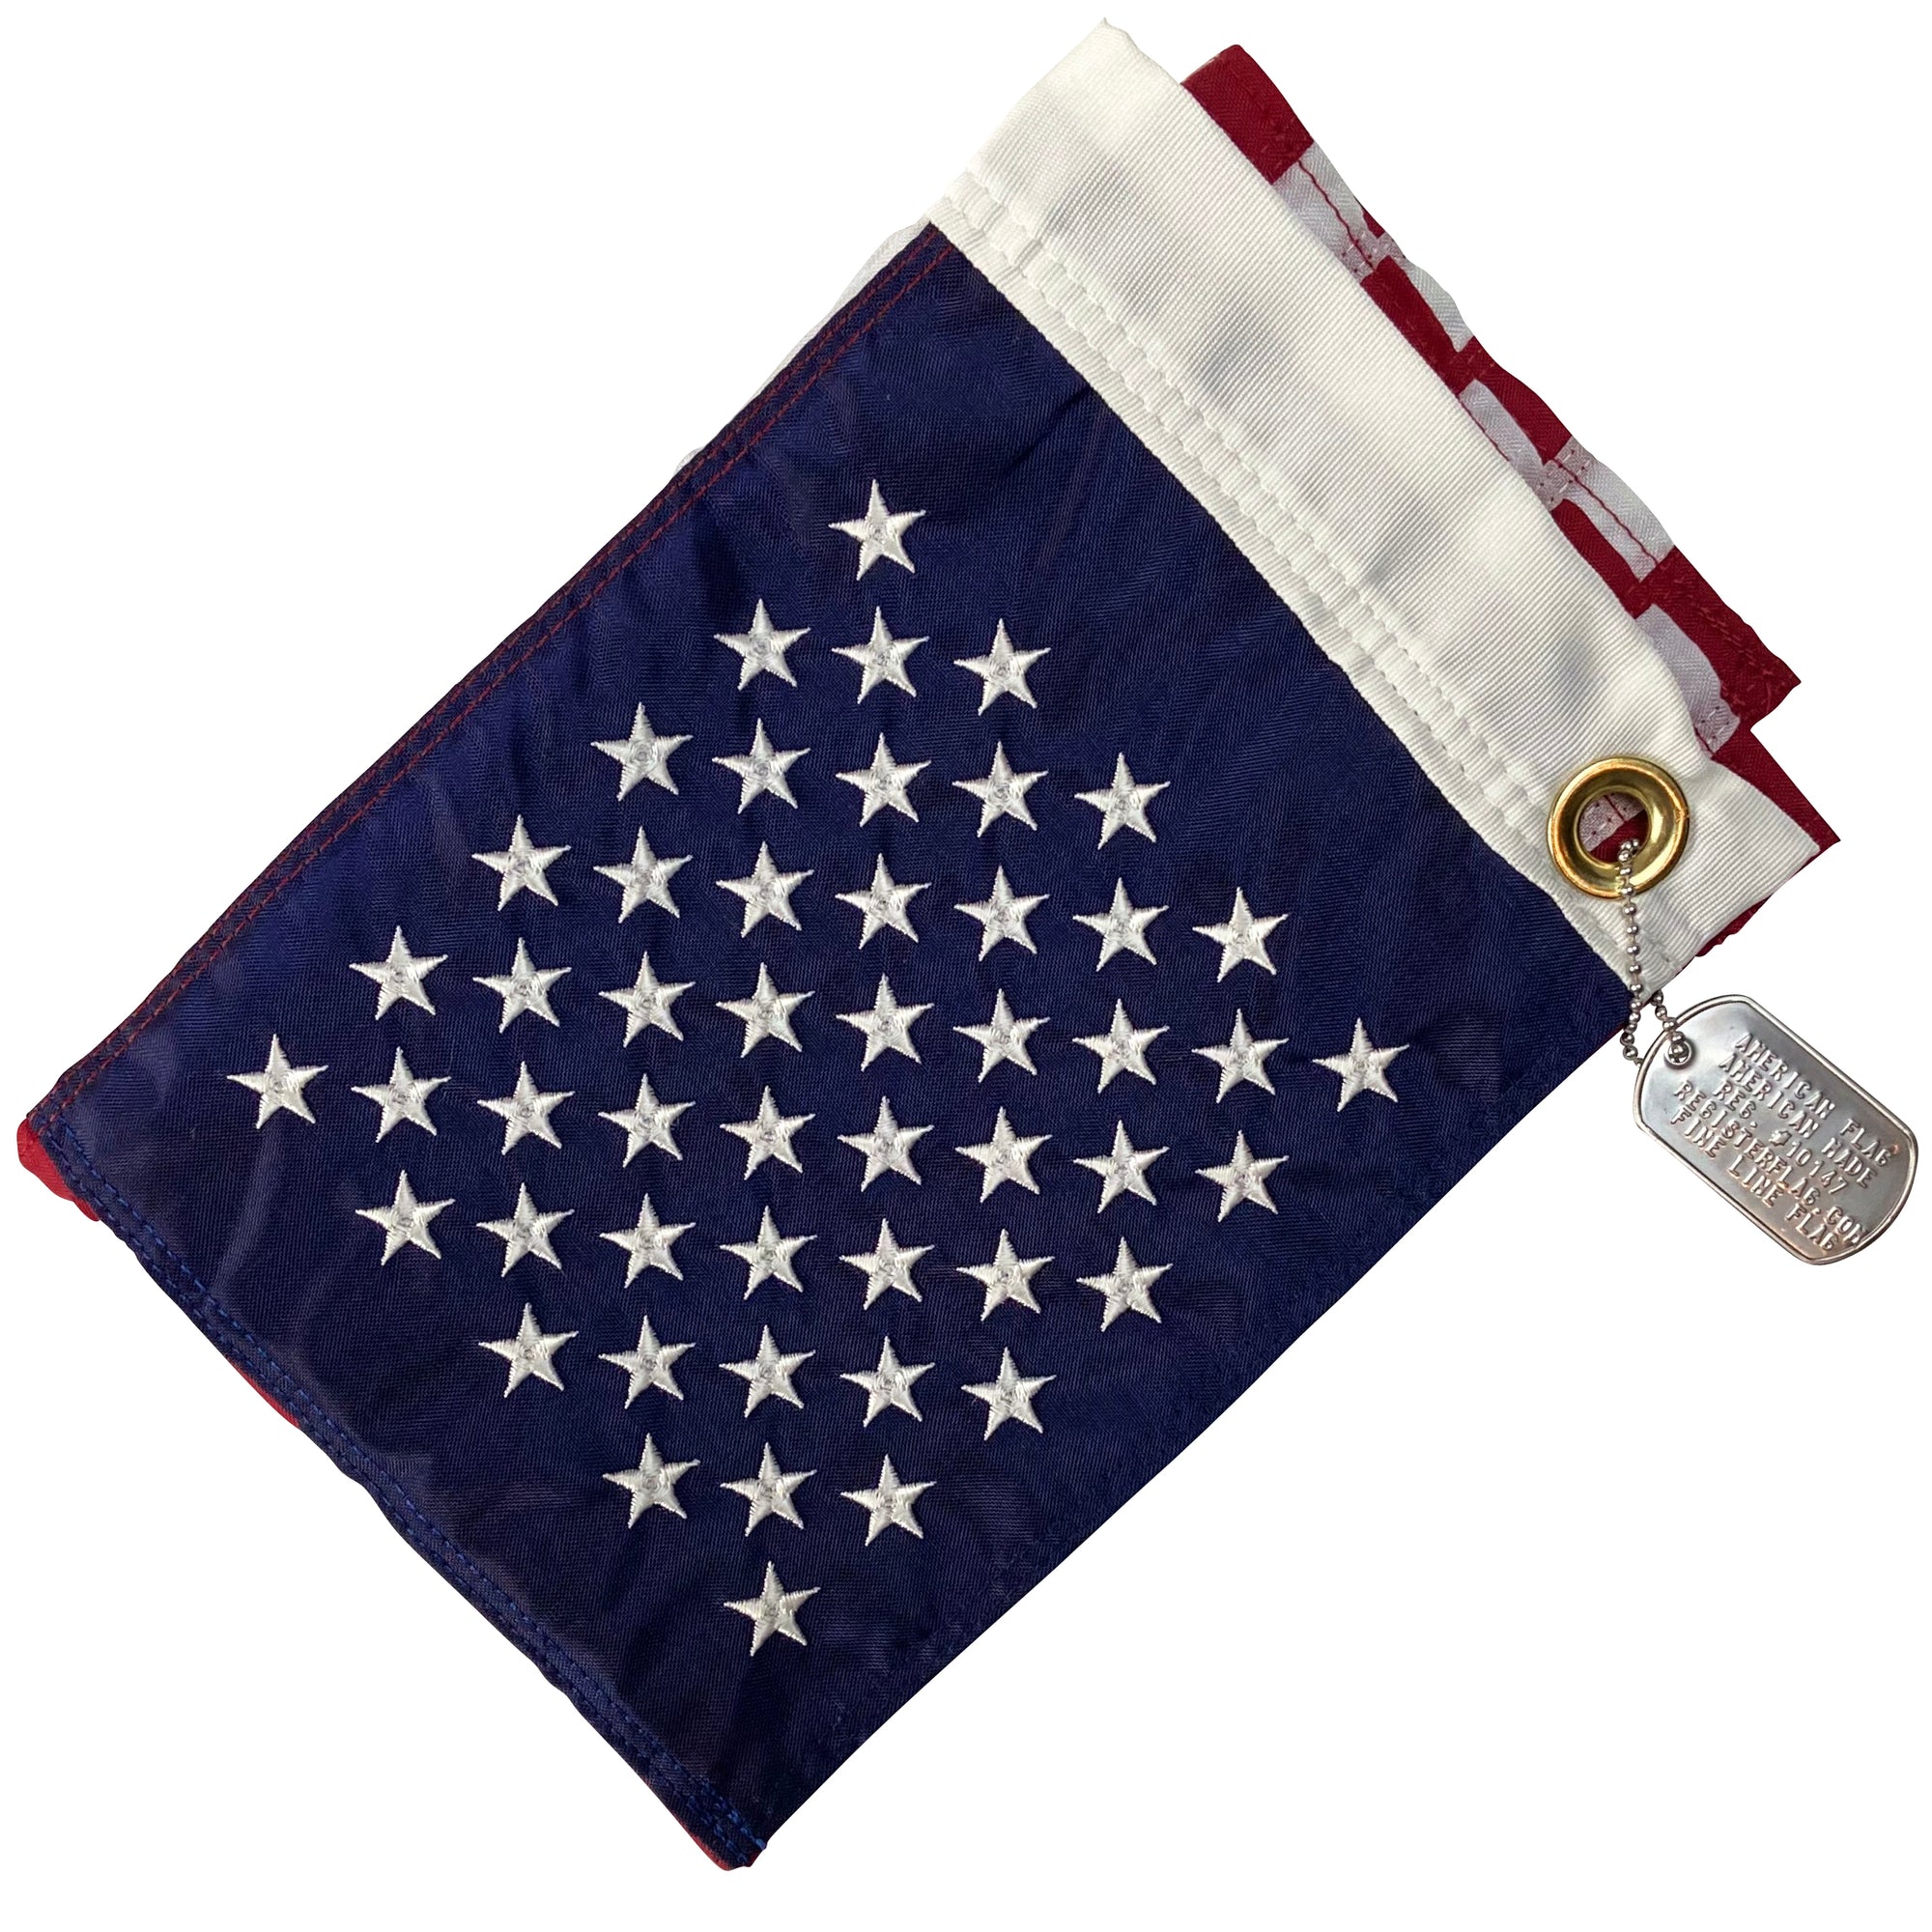 12"x18" American Flag - Made in USA